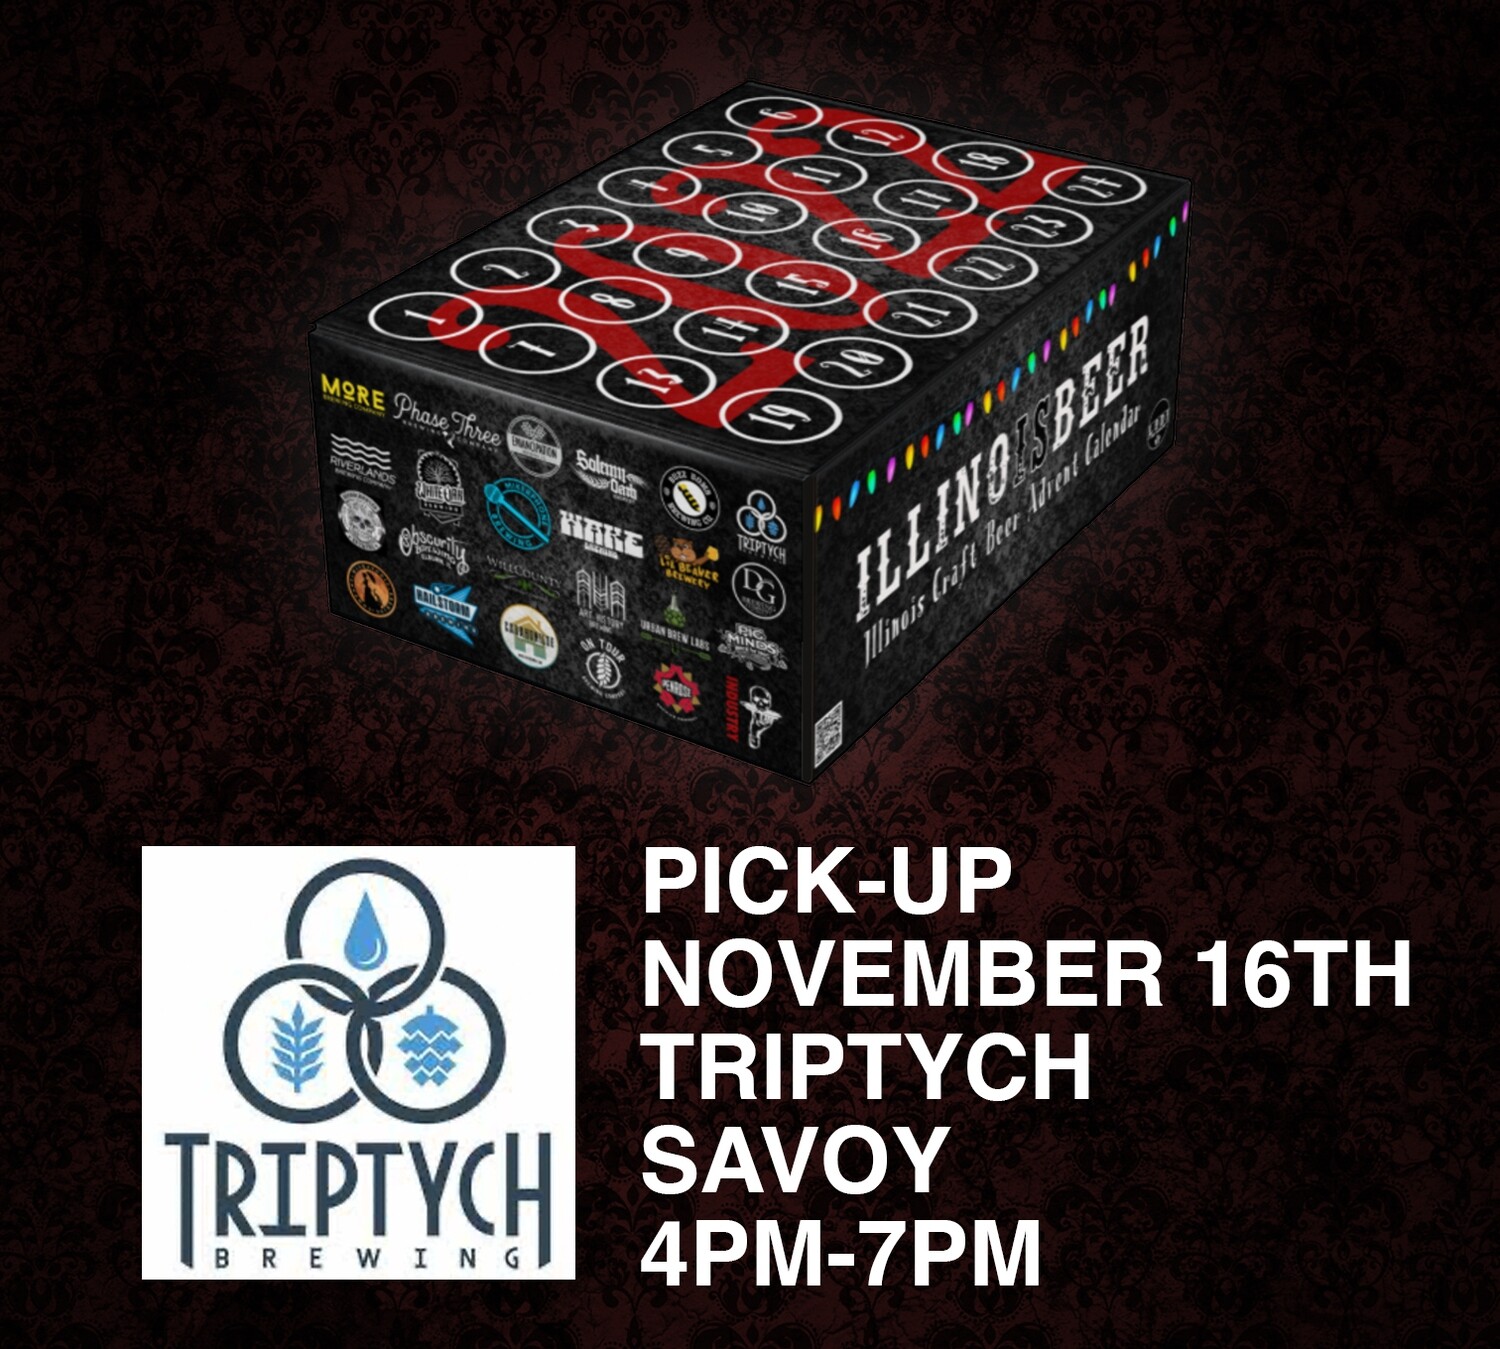 Pick Up 11/16 Savoy IL (Triptych) - 4PM to 7PM ILLINOISBEER Craft Beer Advent Calendar